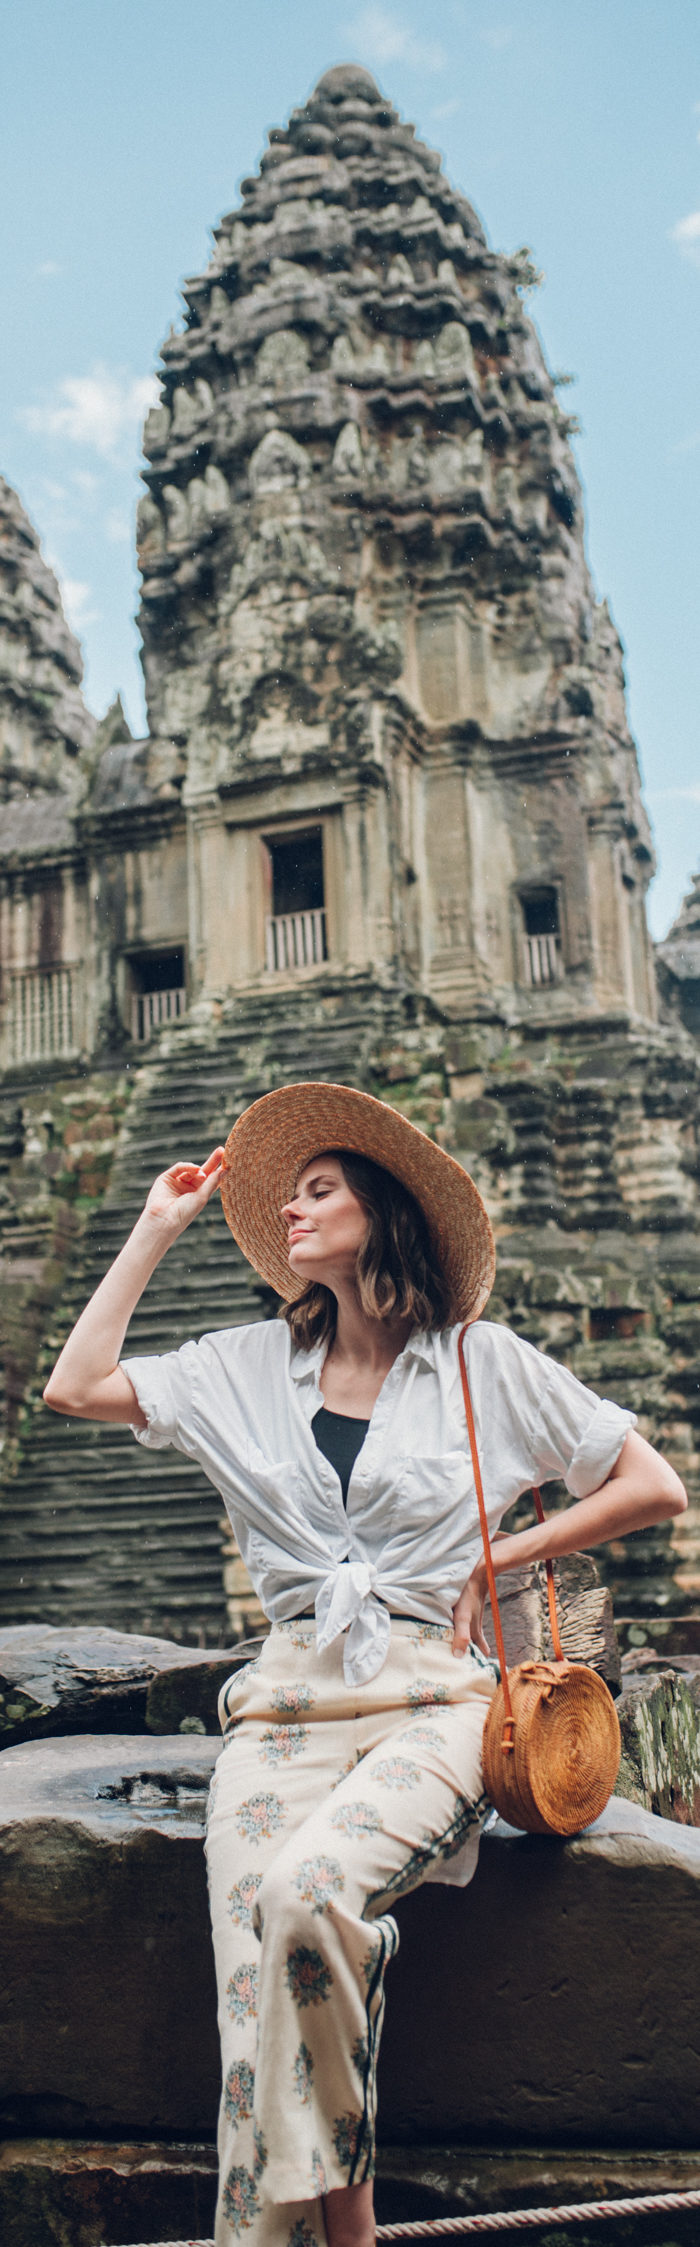 Miss USA 2011 Alyssa Campanella of The A List blog shares what to wear to Angkor Wat in Siem Reap, Cambodia